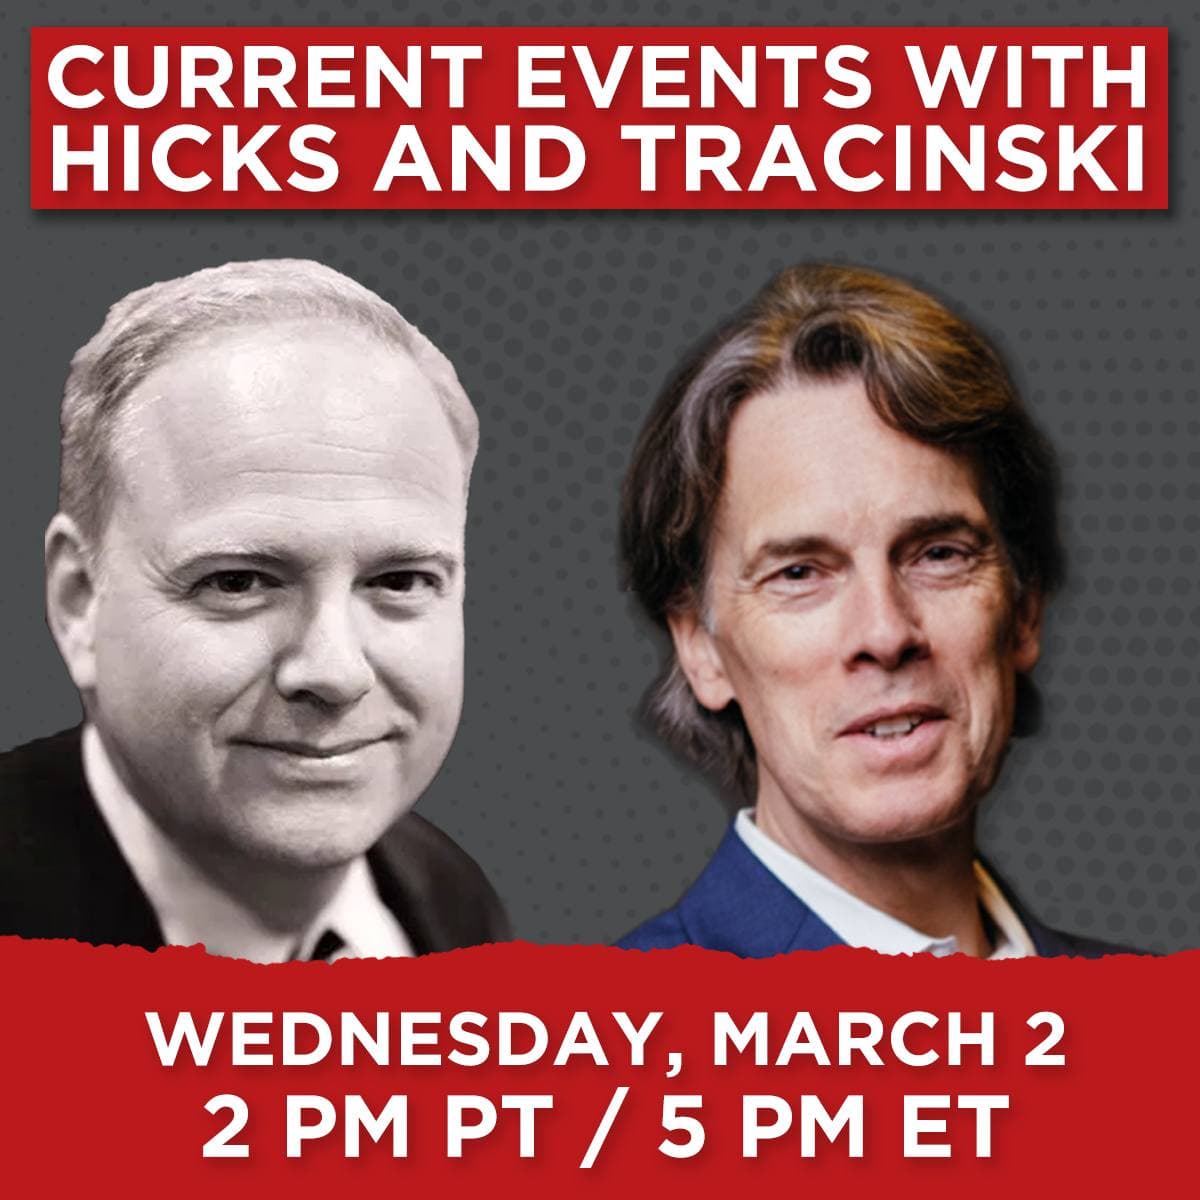 Russia's War on Ukraine: Current Events with Hicks and Tracinski